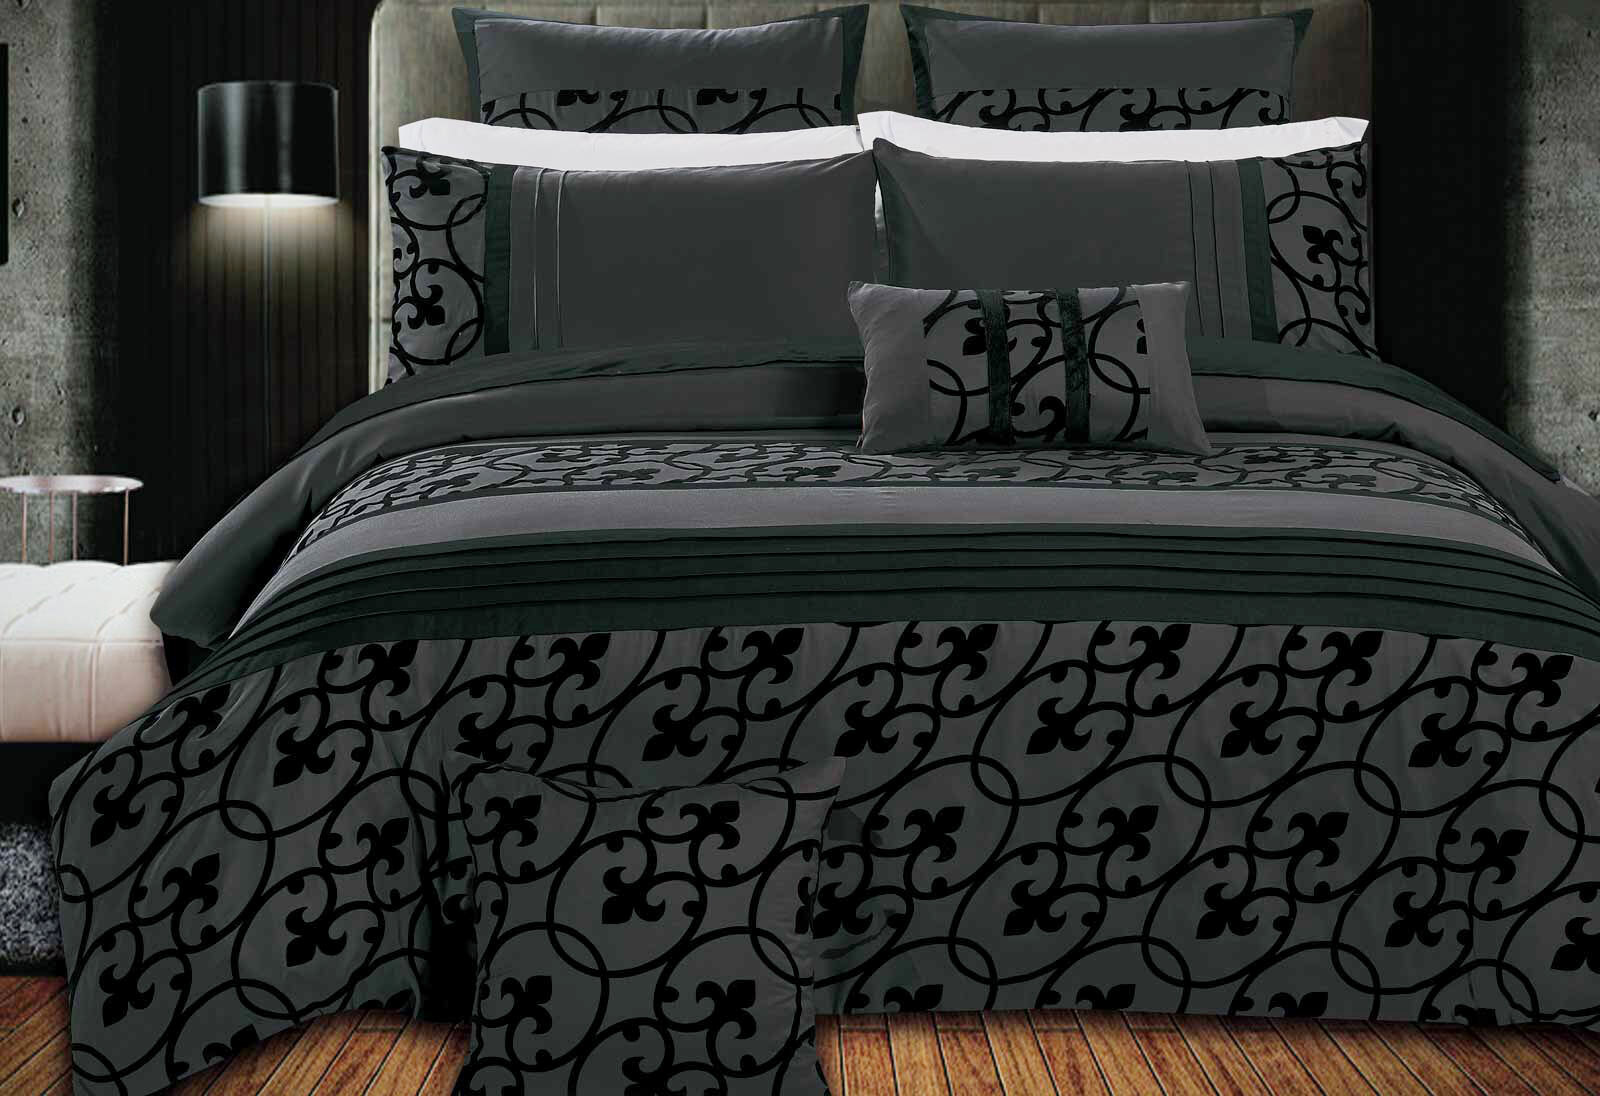 Dursley Charcoal Black Quilt Cover Set By Luxton Warehouse Sale